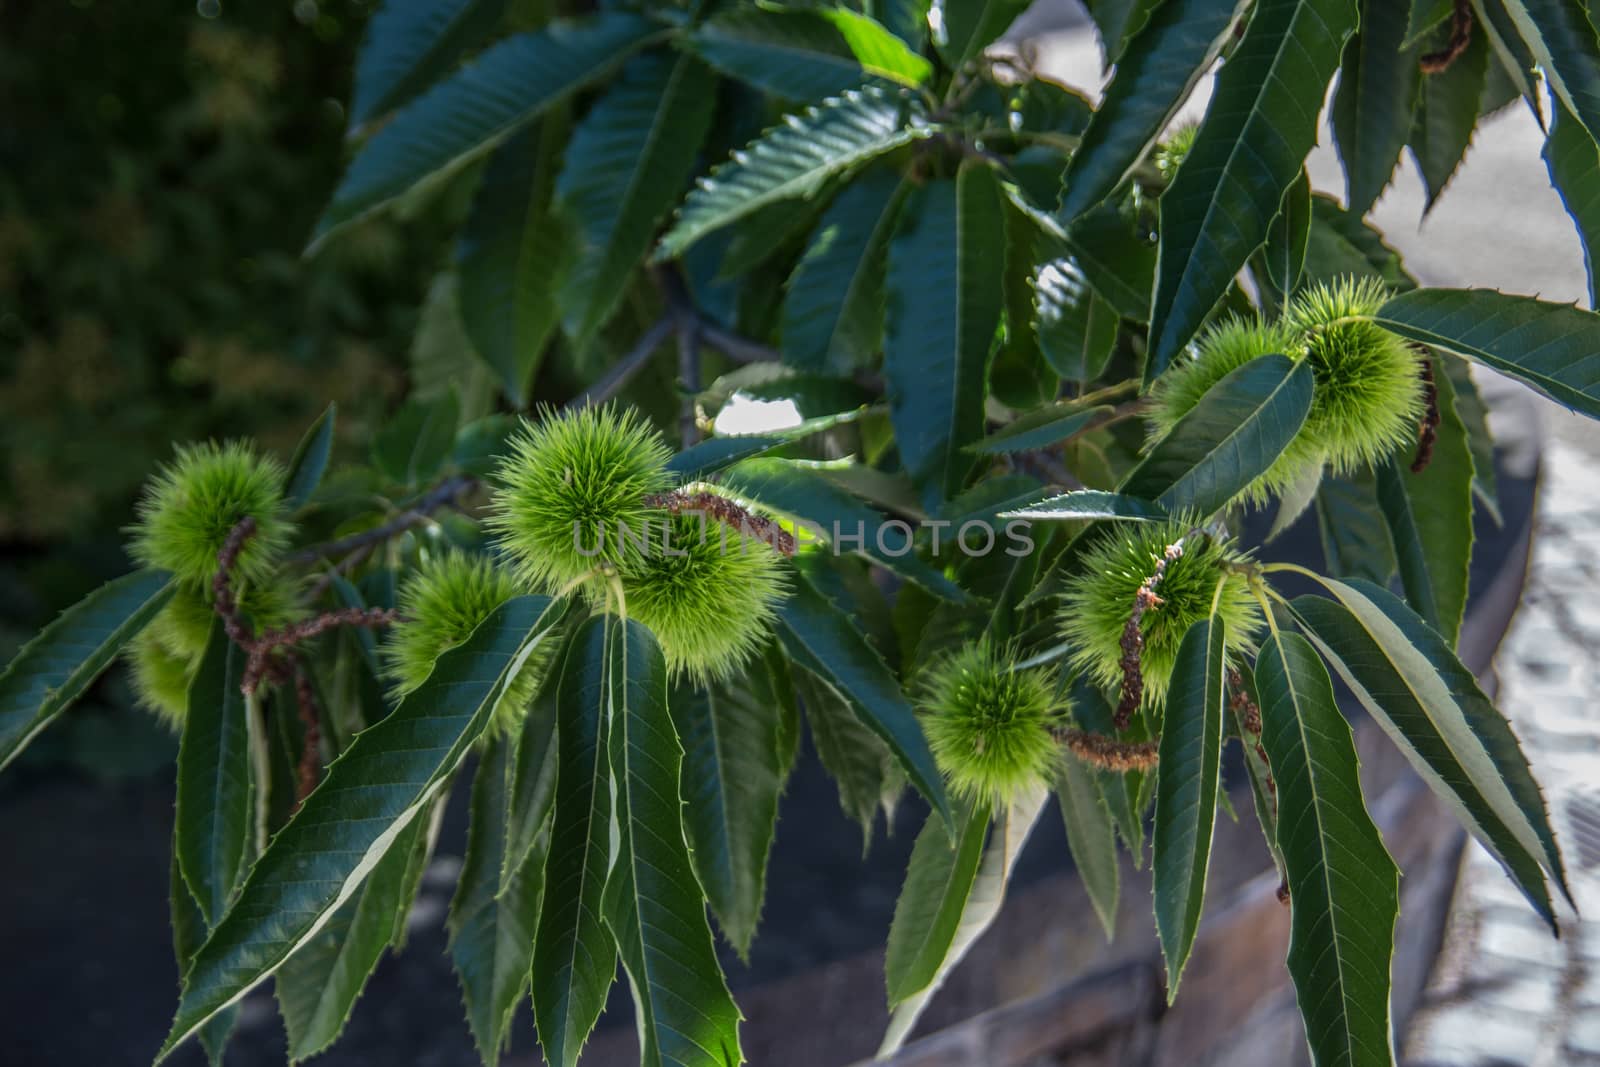 American chestnut in the Sayn castle courtyard by Dr-Lange